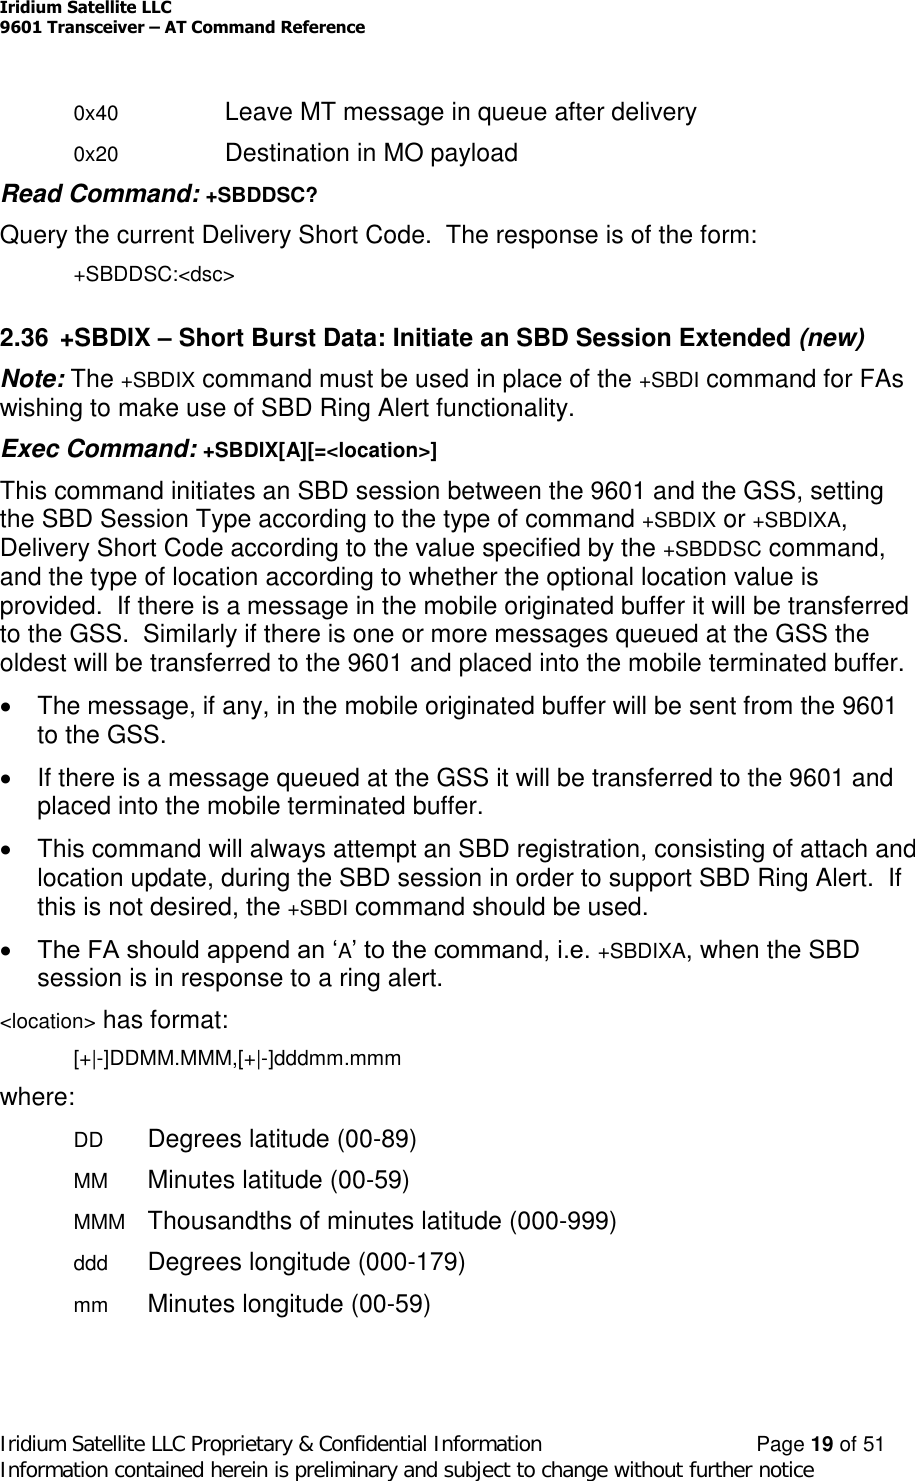 Iridium Satellite LLC9601 Transceiver –AT Command ReferenceIridium Satellite LLC Proprietary &amp; Confidential Information Page 19 of 51Information contained herein is preliminary and subject to change without further notice0x40 Leave MT message in queue after delivery0x20 Destination in MO payloadRead Command: +SBDDSC?Query the current Delivery Short Code. The response is of the form:+SBDDSC:&lt;dsc&gt;2.36 +SBDIX –Short Burst Data: Initiate an SBD Session Extended (new)Note: The +SBDIX command must be used in place of the +SBDI command for FAswishing to make use of SBD Ring Alert functionality.Exec Command: +SBDIX[A][=&lt;location&gt;]This command initiates an SBD session between the 9601 and the GSS, settingthe SBD Session Type according to the type of command +SBDIX or +SBDIXA,Delivery Short Code according to the value specified by the +SBDDSC command,and the type of location according to whether the optional location value isprovided. If there is a message in the mobile originated buffer it will be transferredto the GSS. Similarly if there is one or more messages queued at the GSS theoldest will be transferred to the 9601 and placed into the mobile terminated buffer.The message, if any, in the mobile originated buffer will be sent from the 9601to the GSS.If there is a message queued at the GSS it will be transferred to the 9601 andplaced into the mobile terminated buffer.This command will always attempt an SBD registration, consisting of attach andlocation update, during the SBD session in order to support SBD Ring Alert. Ifthis is not desired, the +SBDI command should be used.The FA should append an ‘A’ to the command, i.e. +SBDIXA, when the SBDsession is in response to a ring alert.&lt;location&gt; has format:[+|-]DDMM.MMM,[+|-]dddmm.mmmwhere:DD Degrees latitude (00-89)MM Minutes latitude (00-59)MMM Thousandths of minutes latitude (000-999)ddd Degrees longitude (000-179)mm Minutes longitude (00-59)